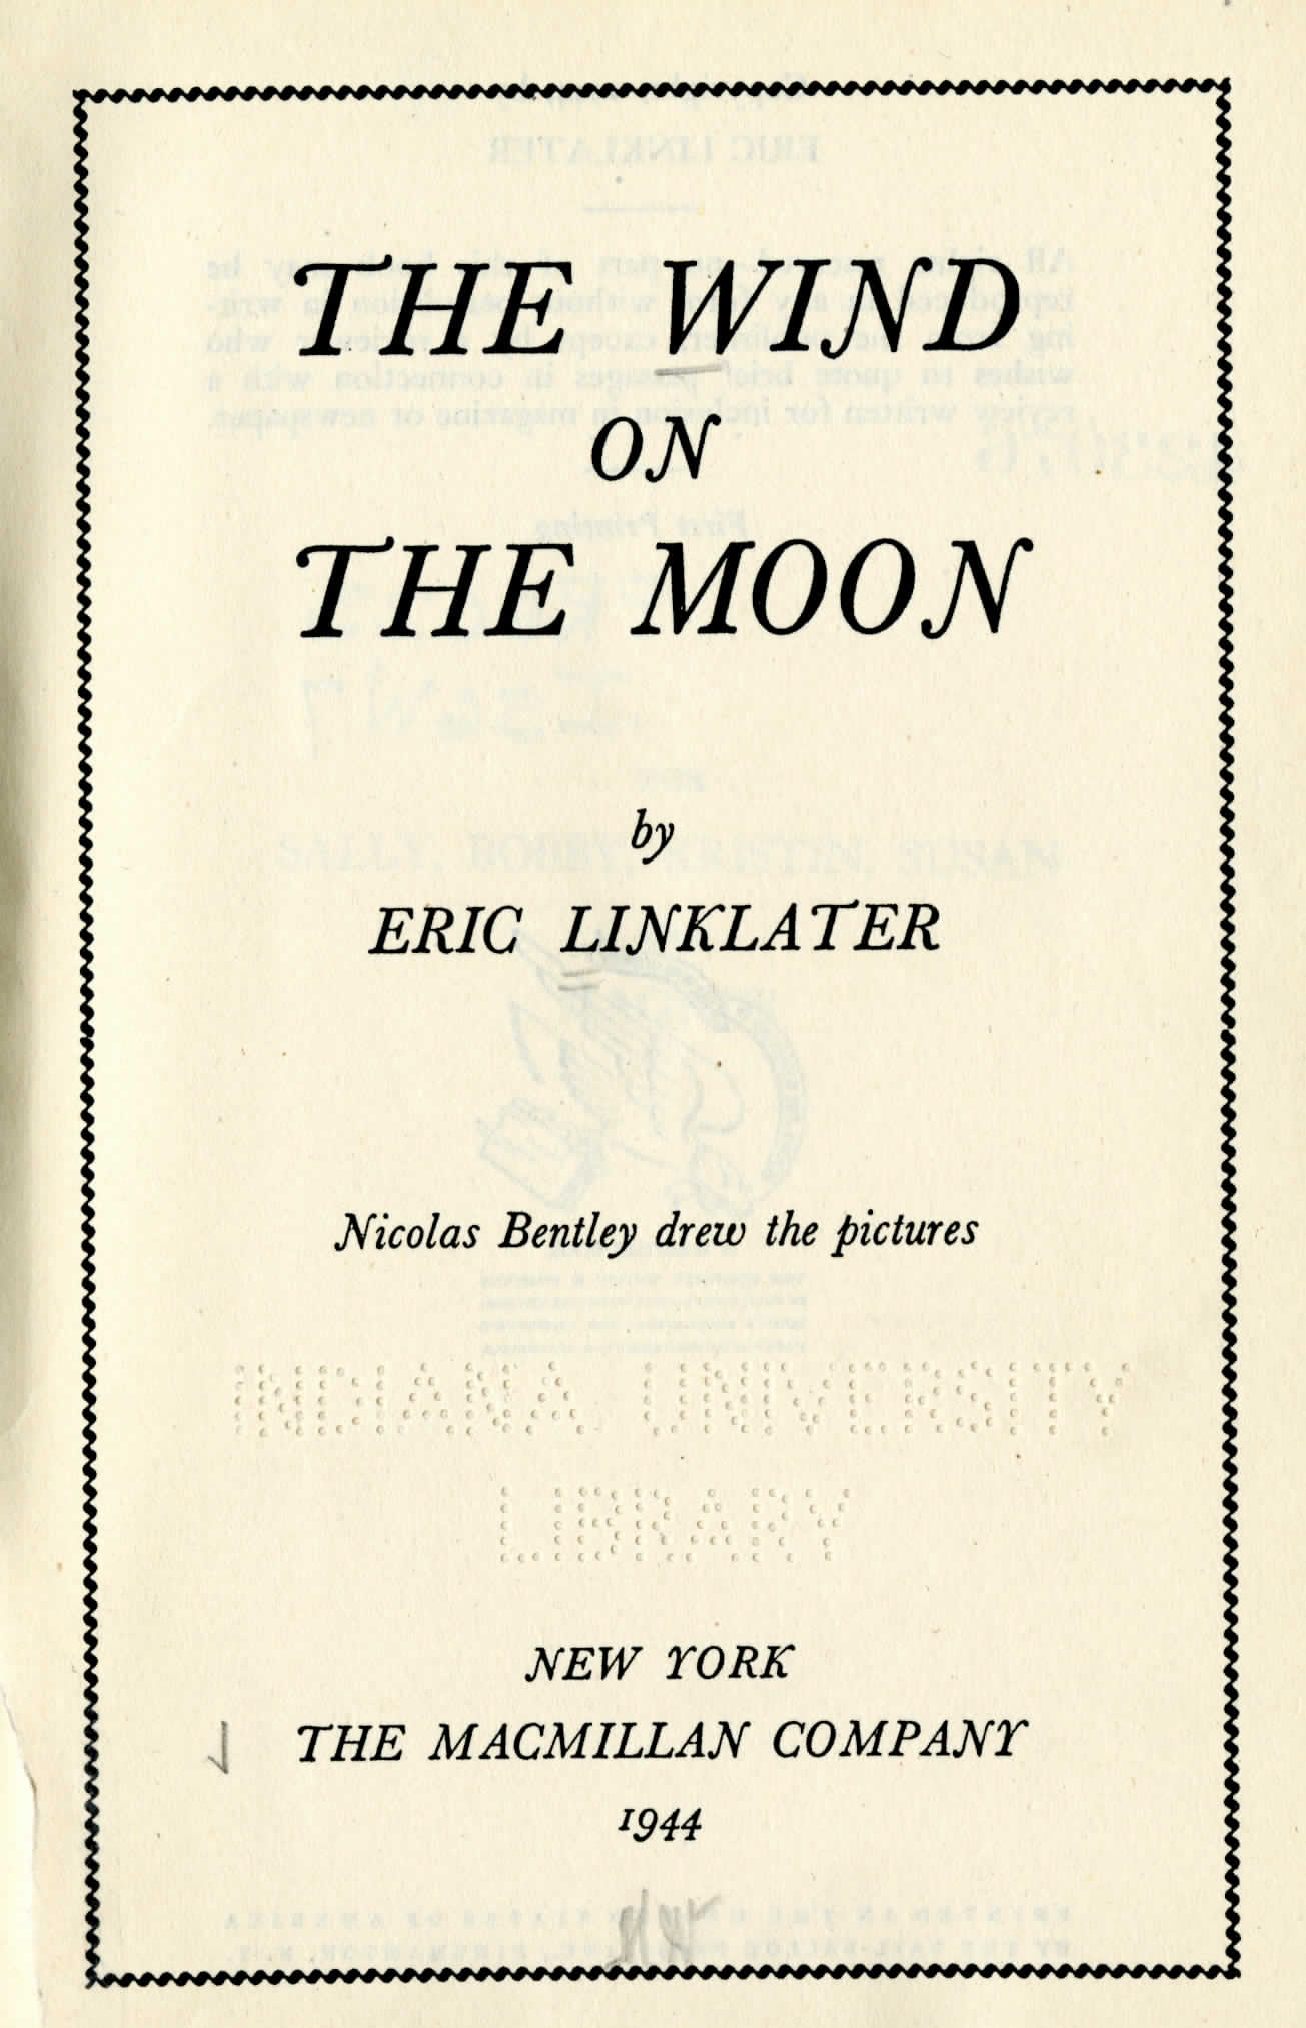 Title Page for The Wind on the Moon by Eric Linklater